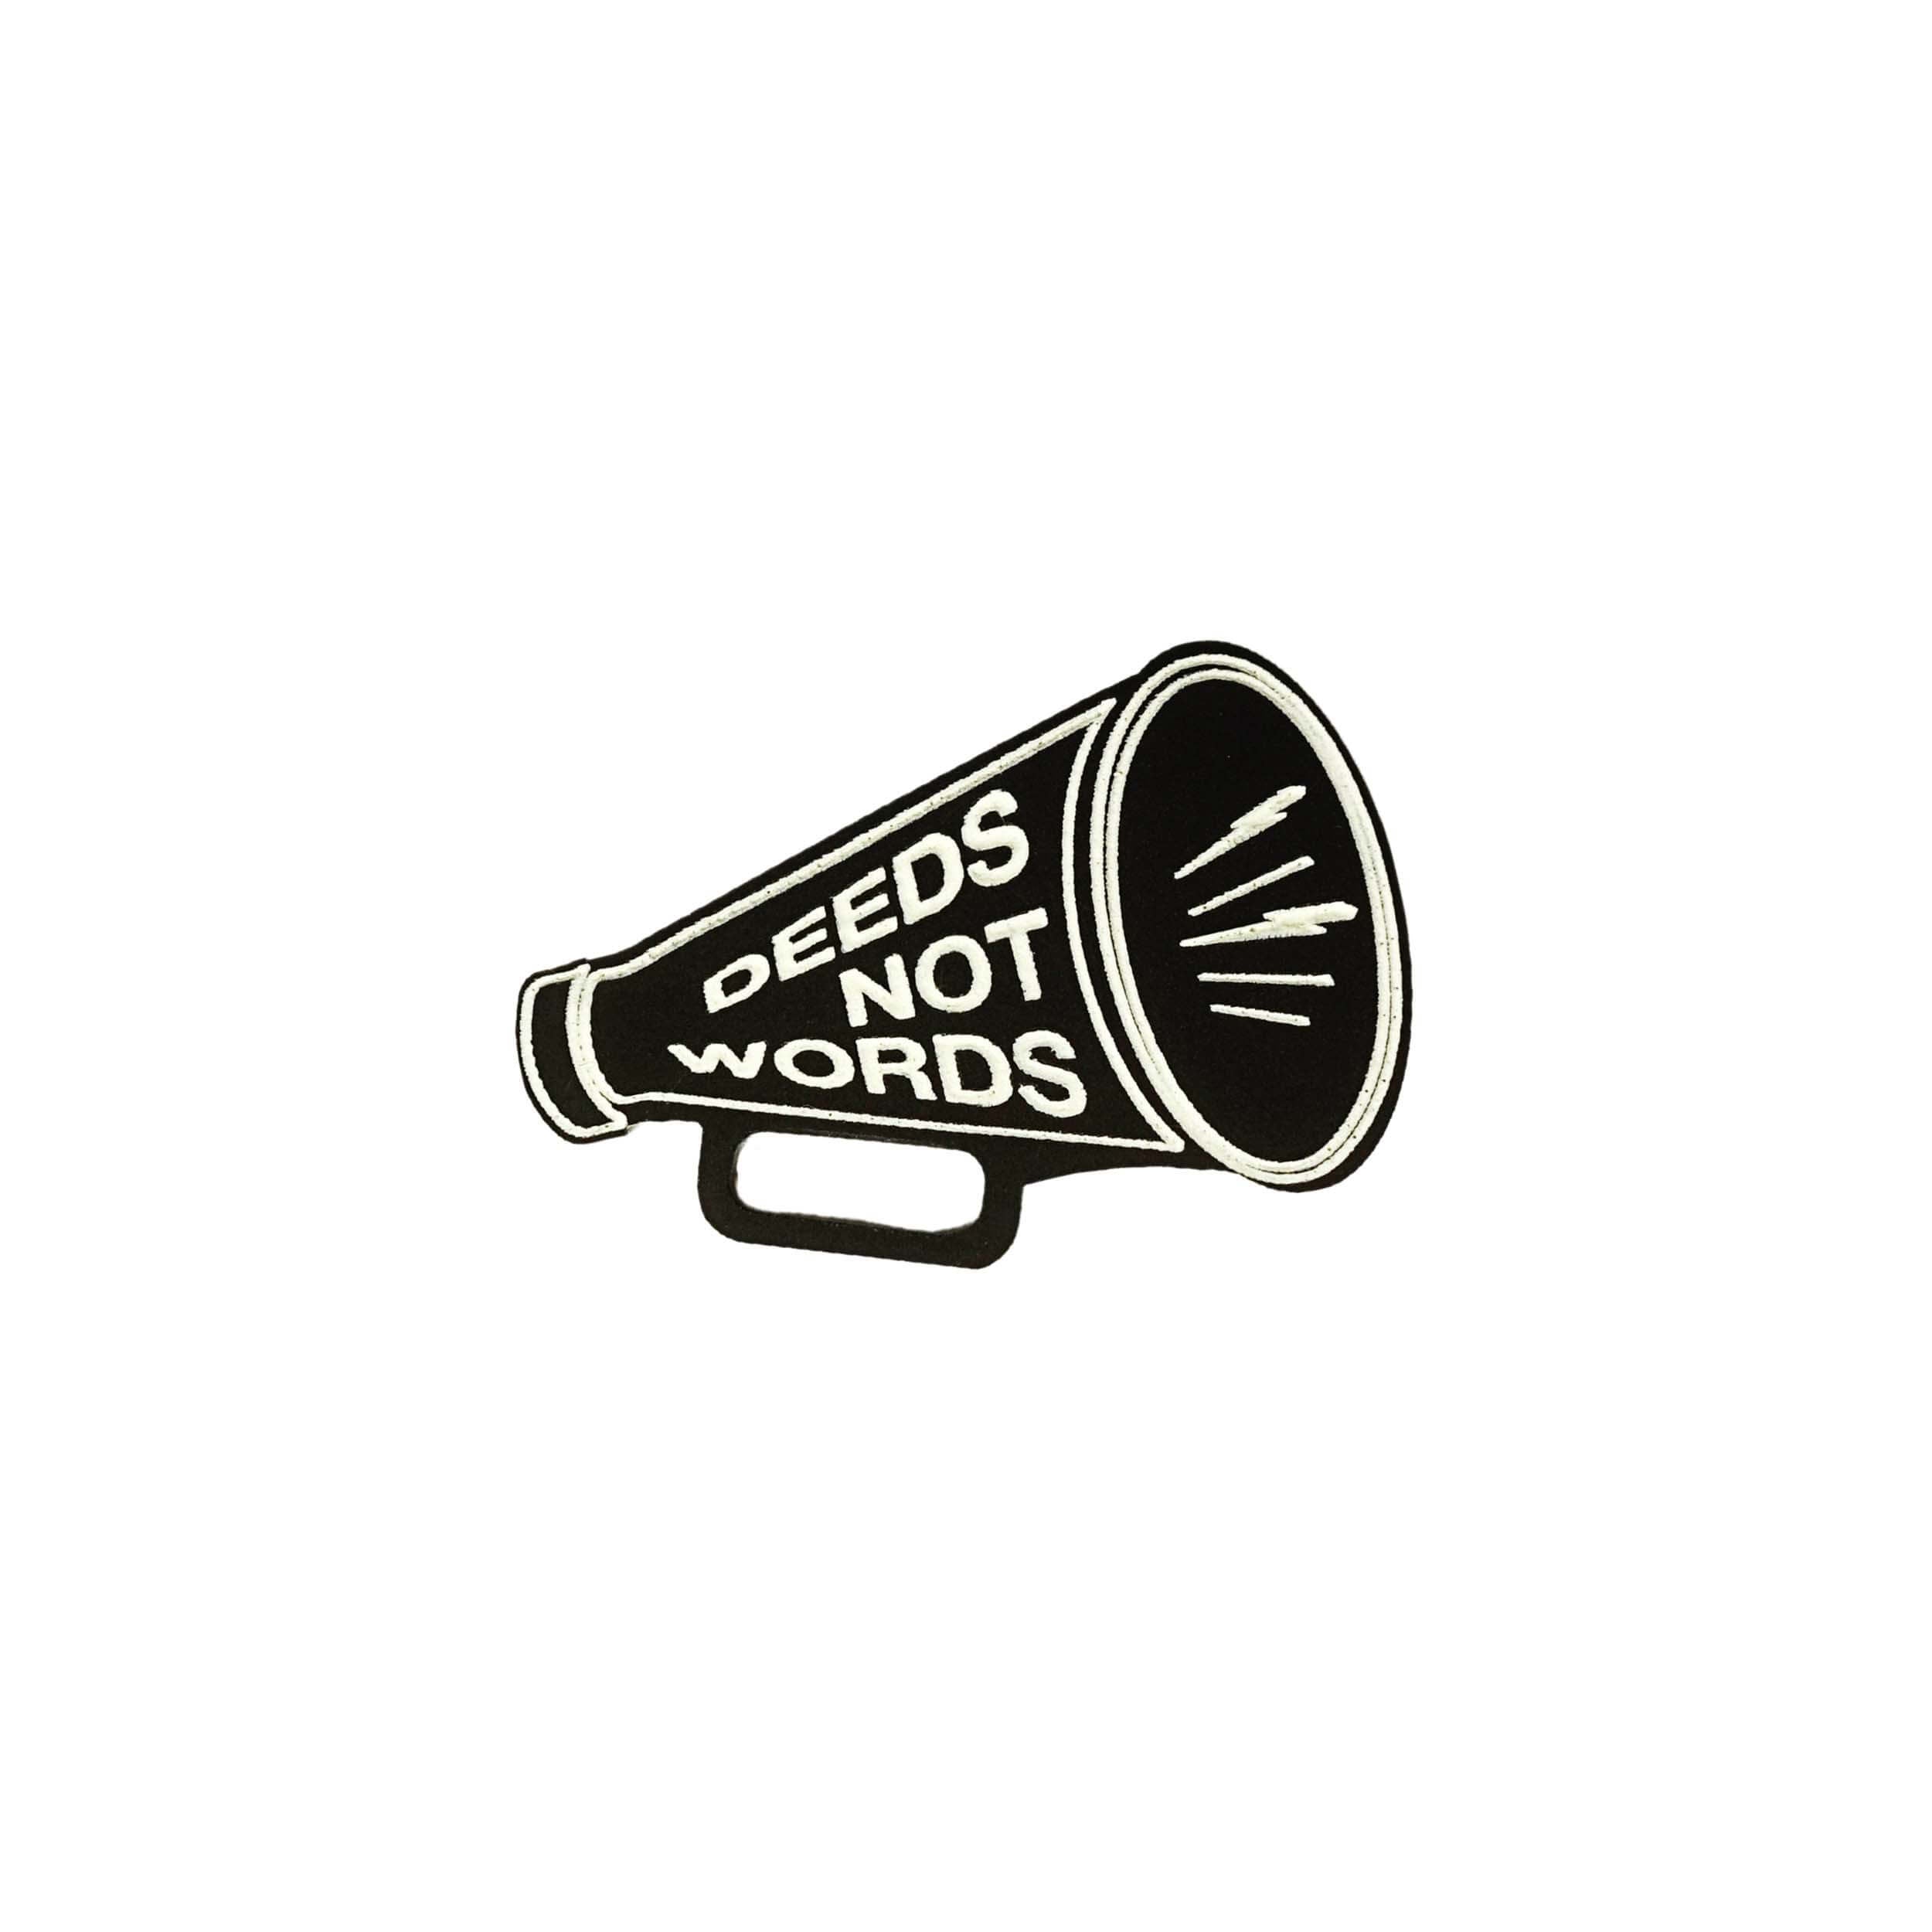 DEEDS NOT WORDS Megaphone brooch. Suffragette jewellery for the modern age. 